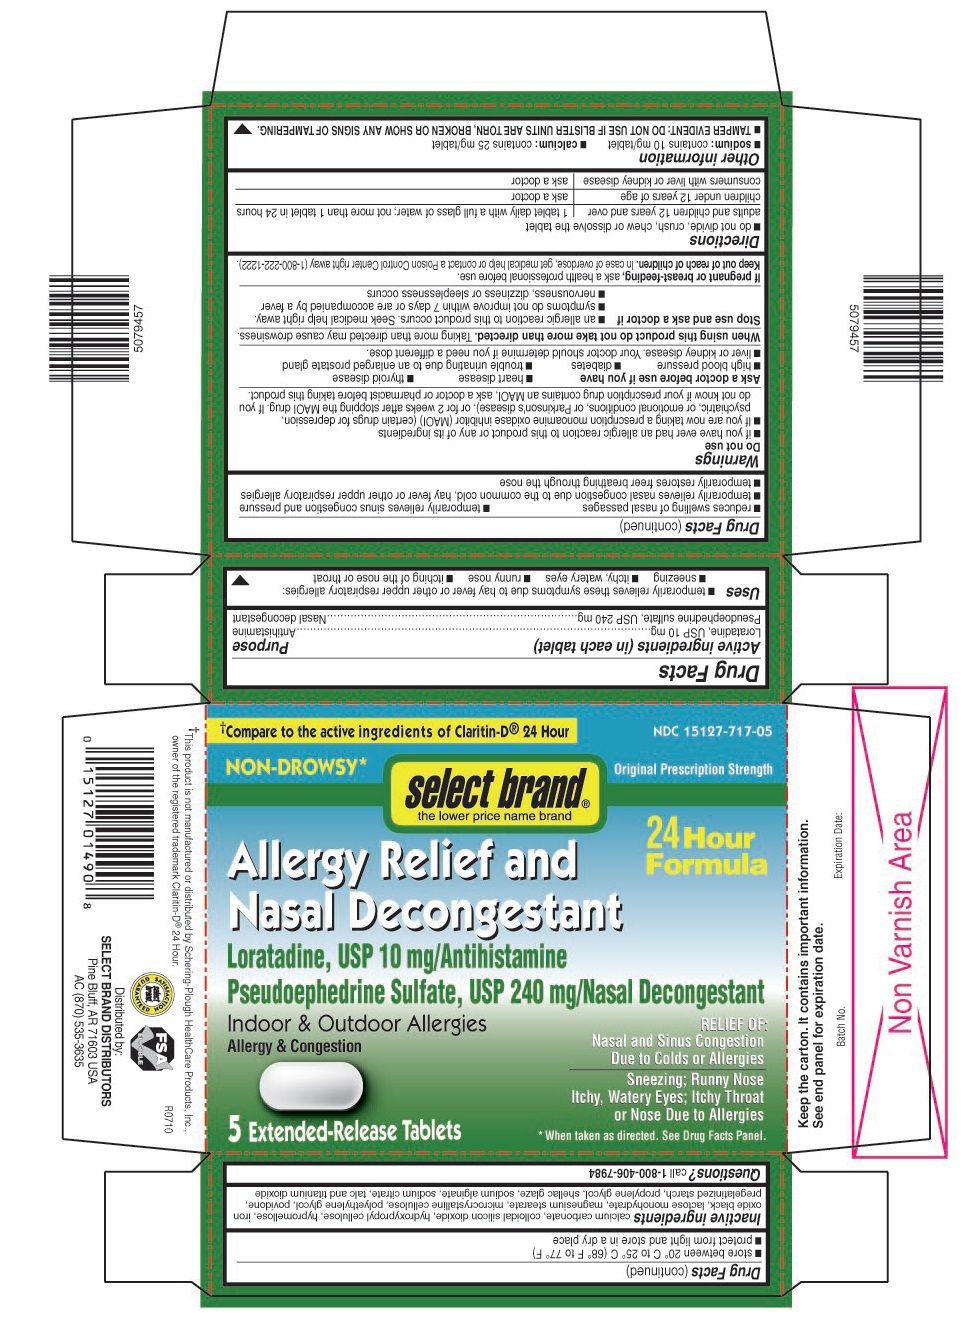 This is the 5 count blister carton label for Select Brand Loratadine D tablets.